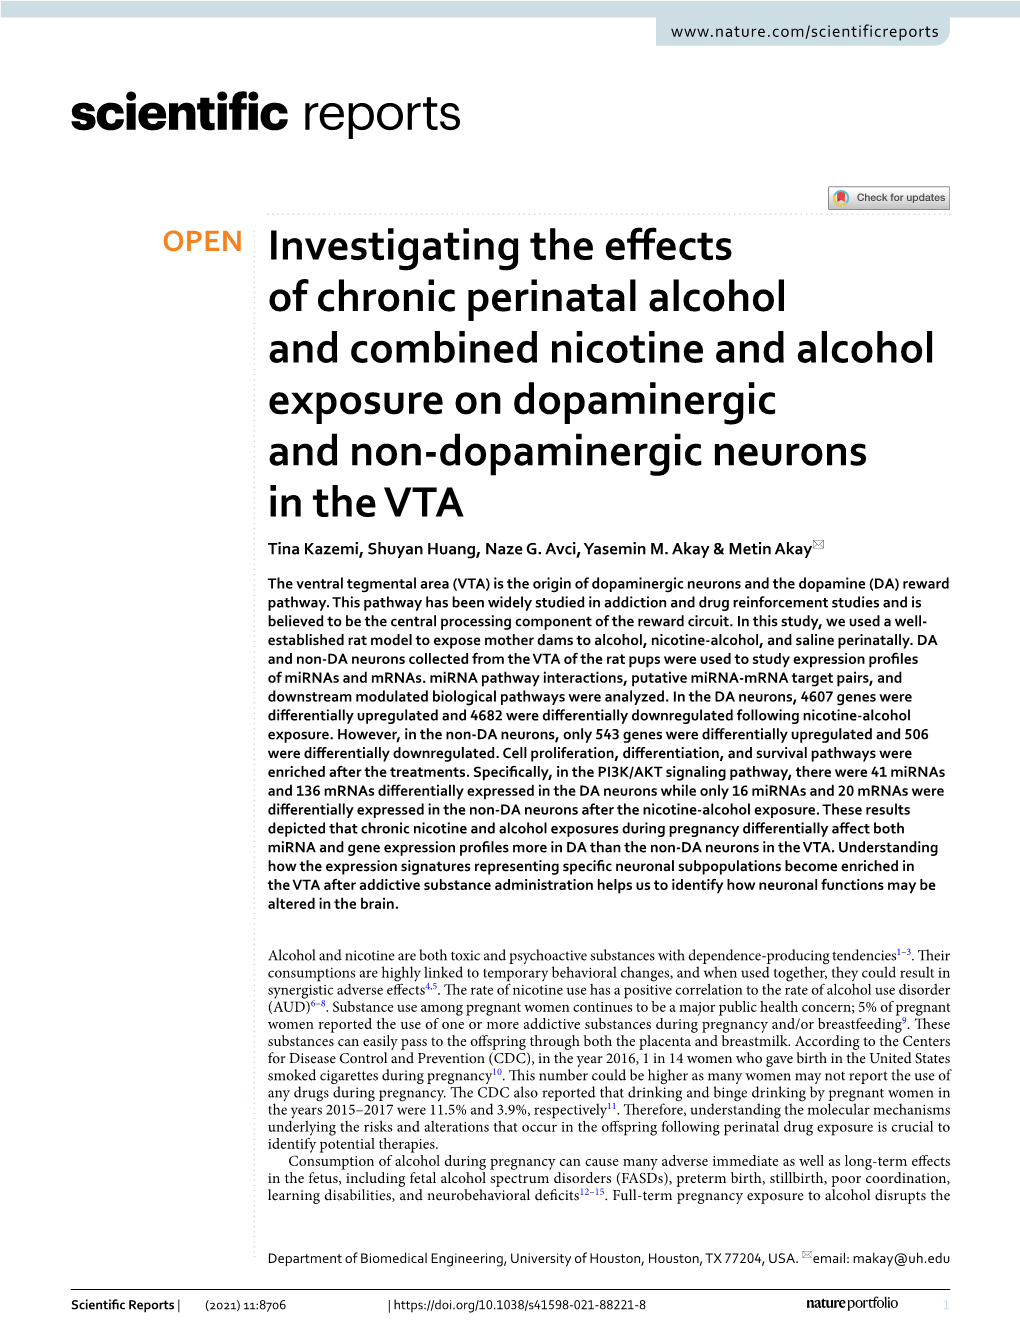 Investigating the Effects of Chronic Perinatal Alcohol and Combined